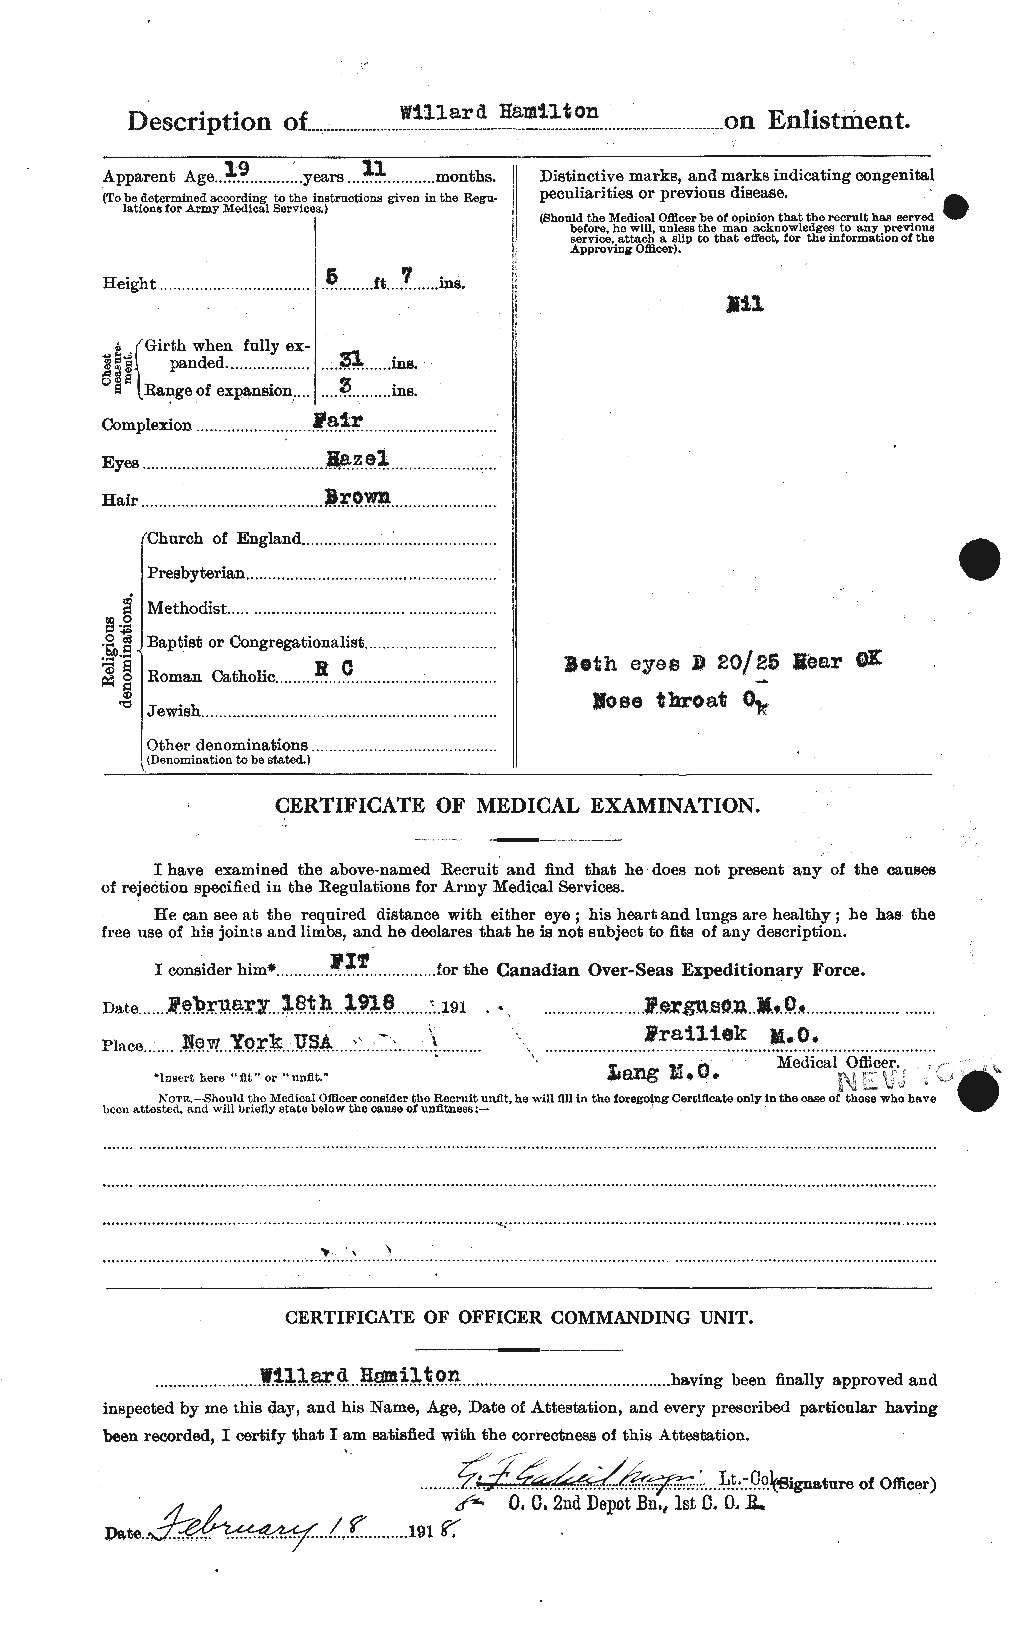 Personnel Records of the First World War - CEF 374830b